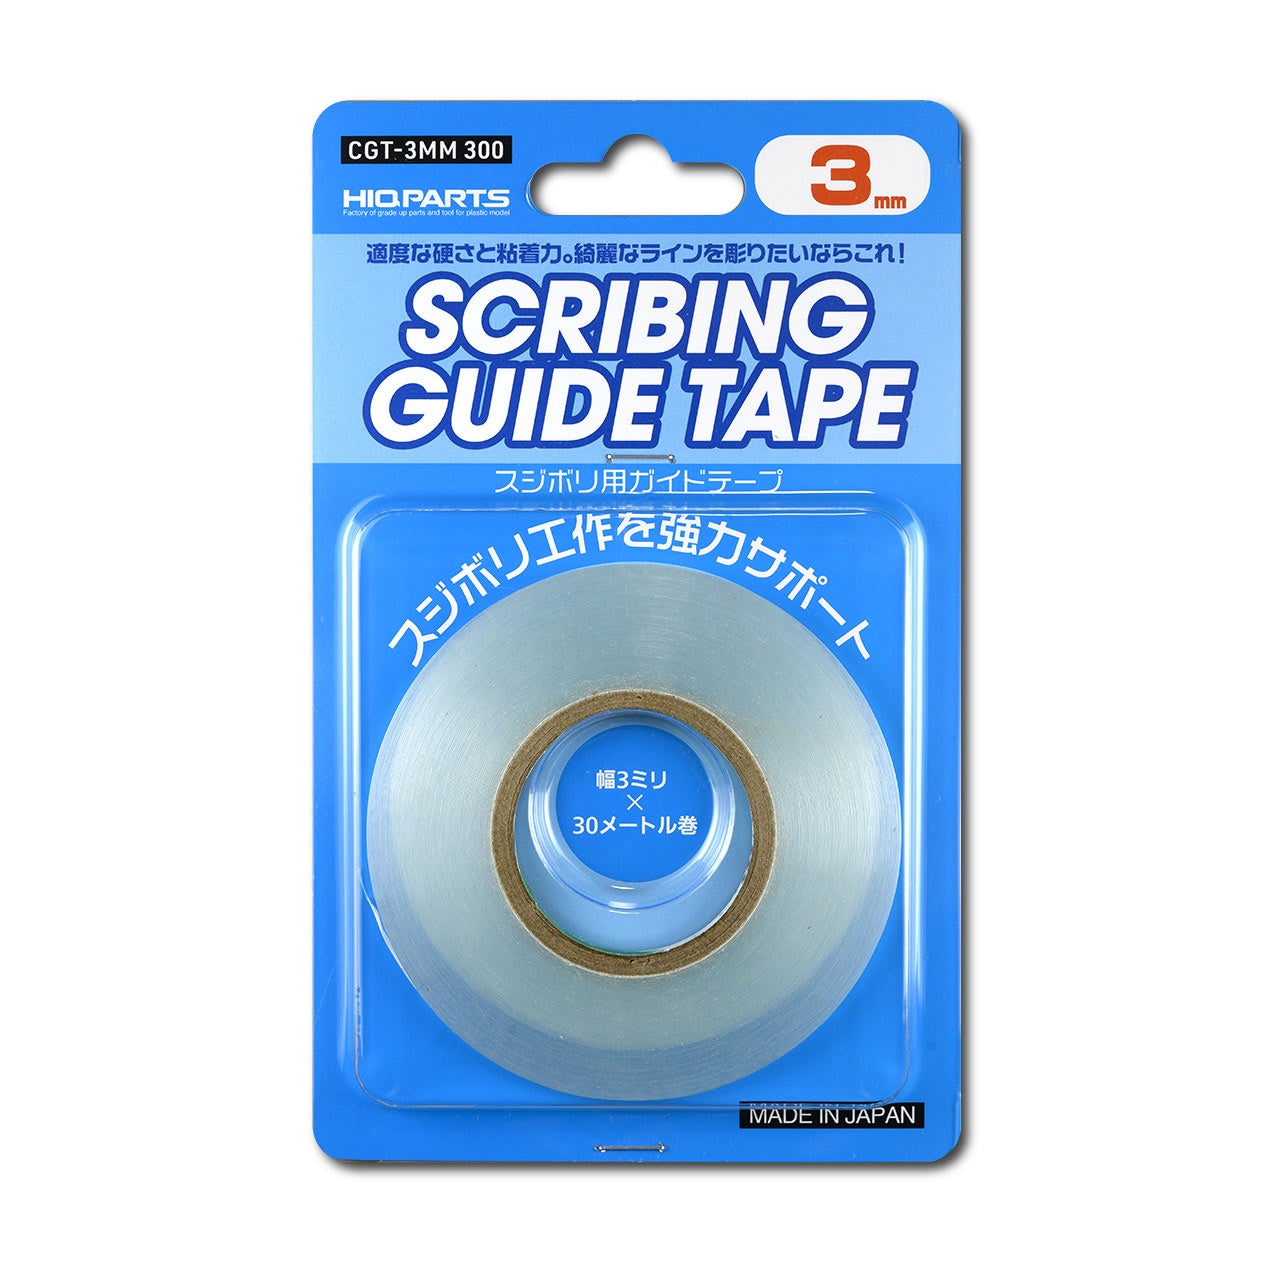 HiQ Parts Guide Tape for Scribing 3mm (30m Roll)